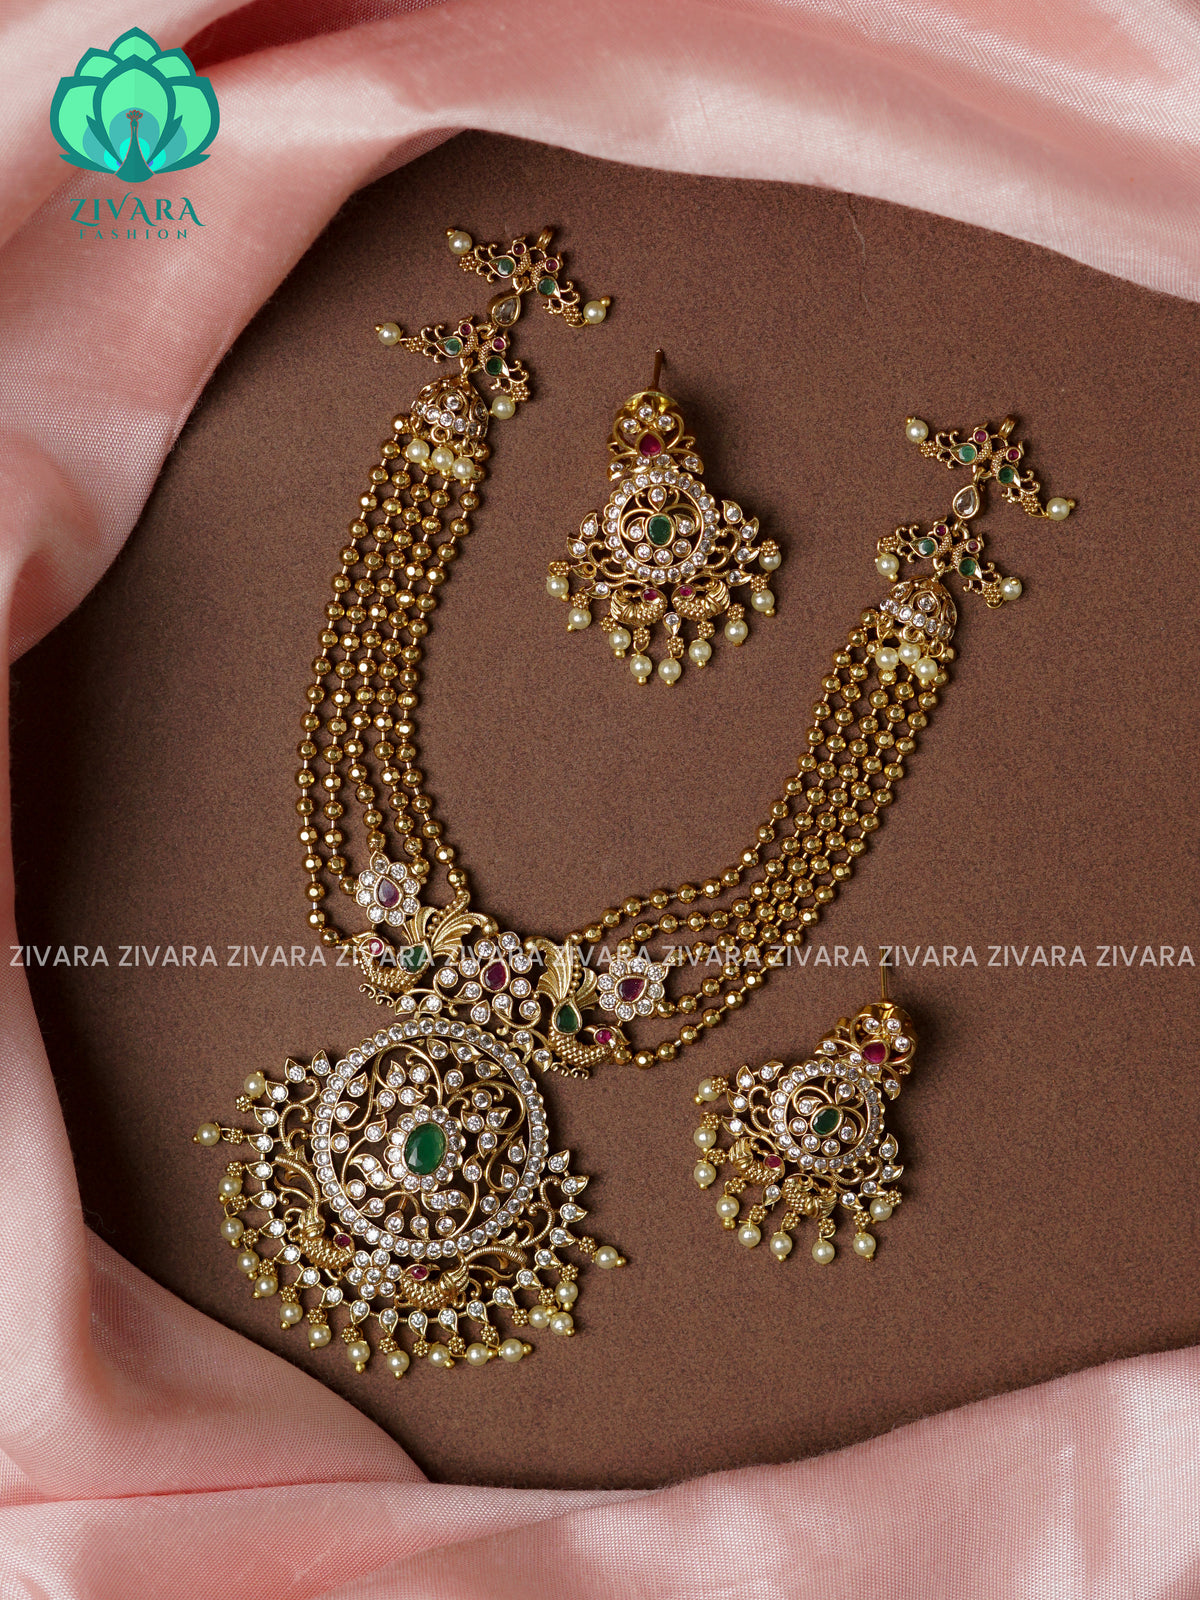 BALL CHAIN AND ROUND PENDANT  -Traditional south indian premium neckwear with earrings- Zivara Fashion- latest jewellery design.